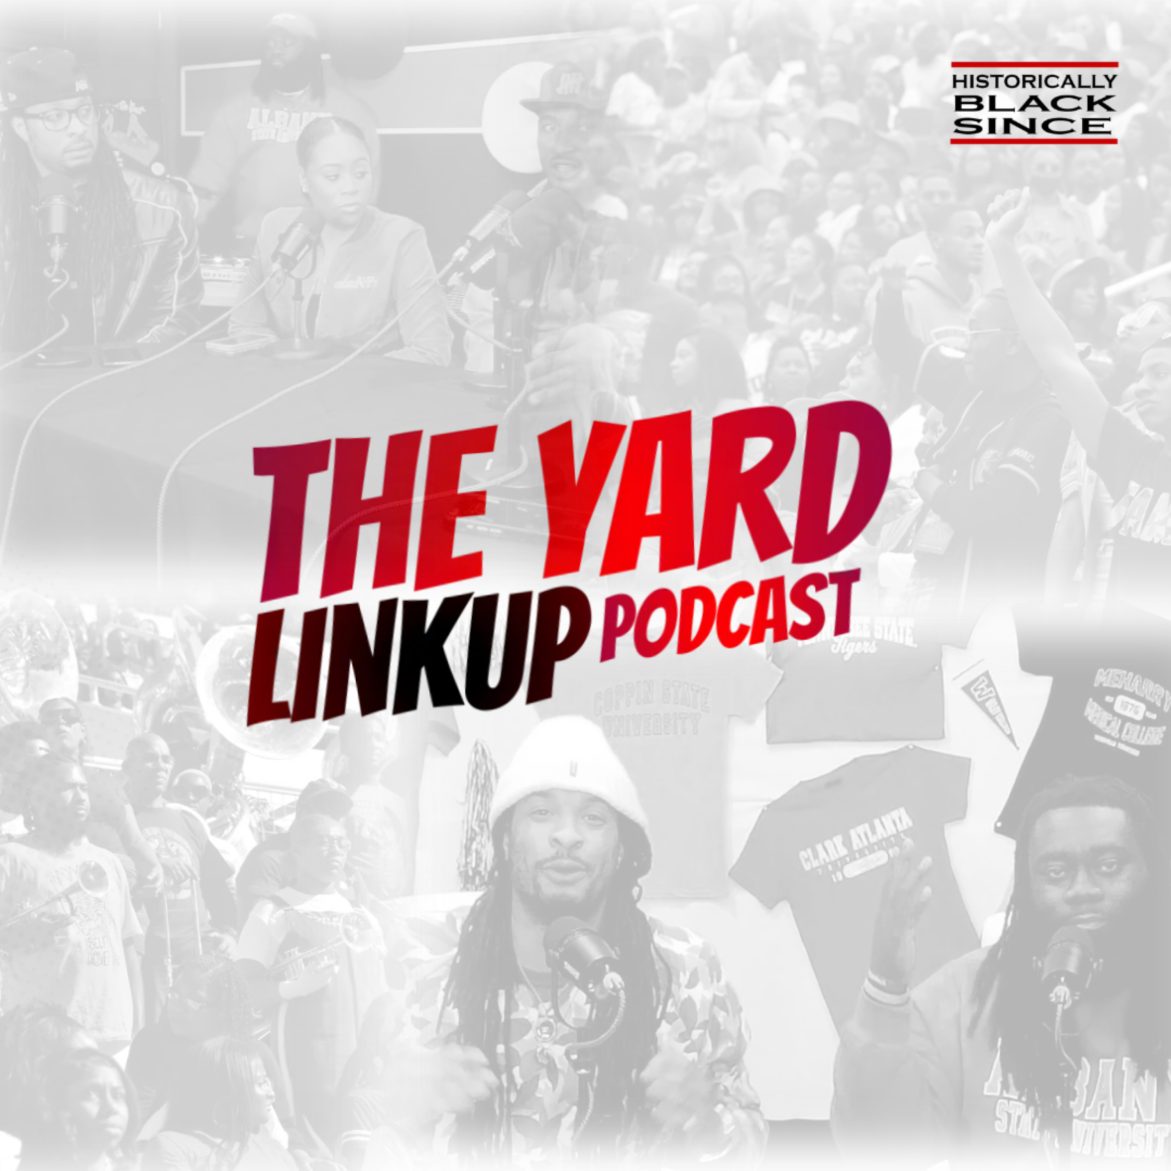 Black Podcasting - From Tuskegee University to Survivor Reality Show and Cosplay